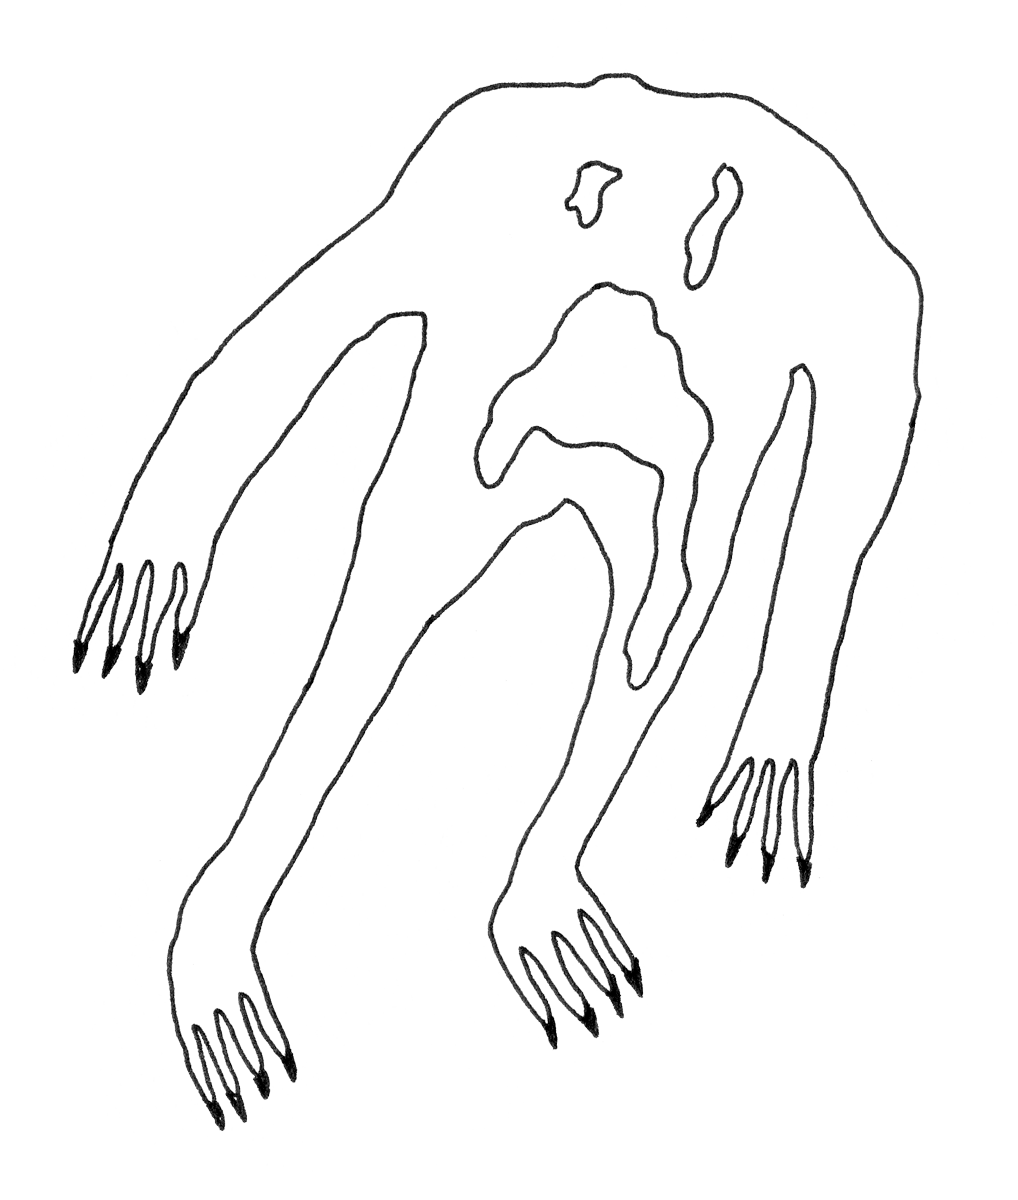 Line drawing of a melting monster-like figure